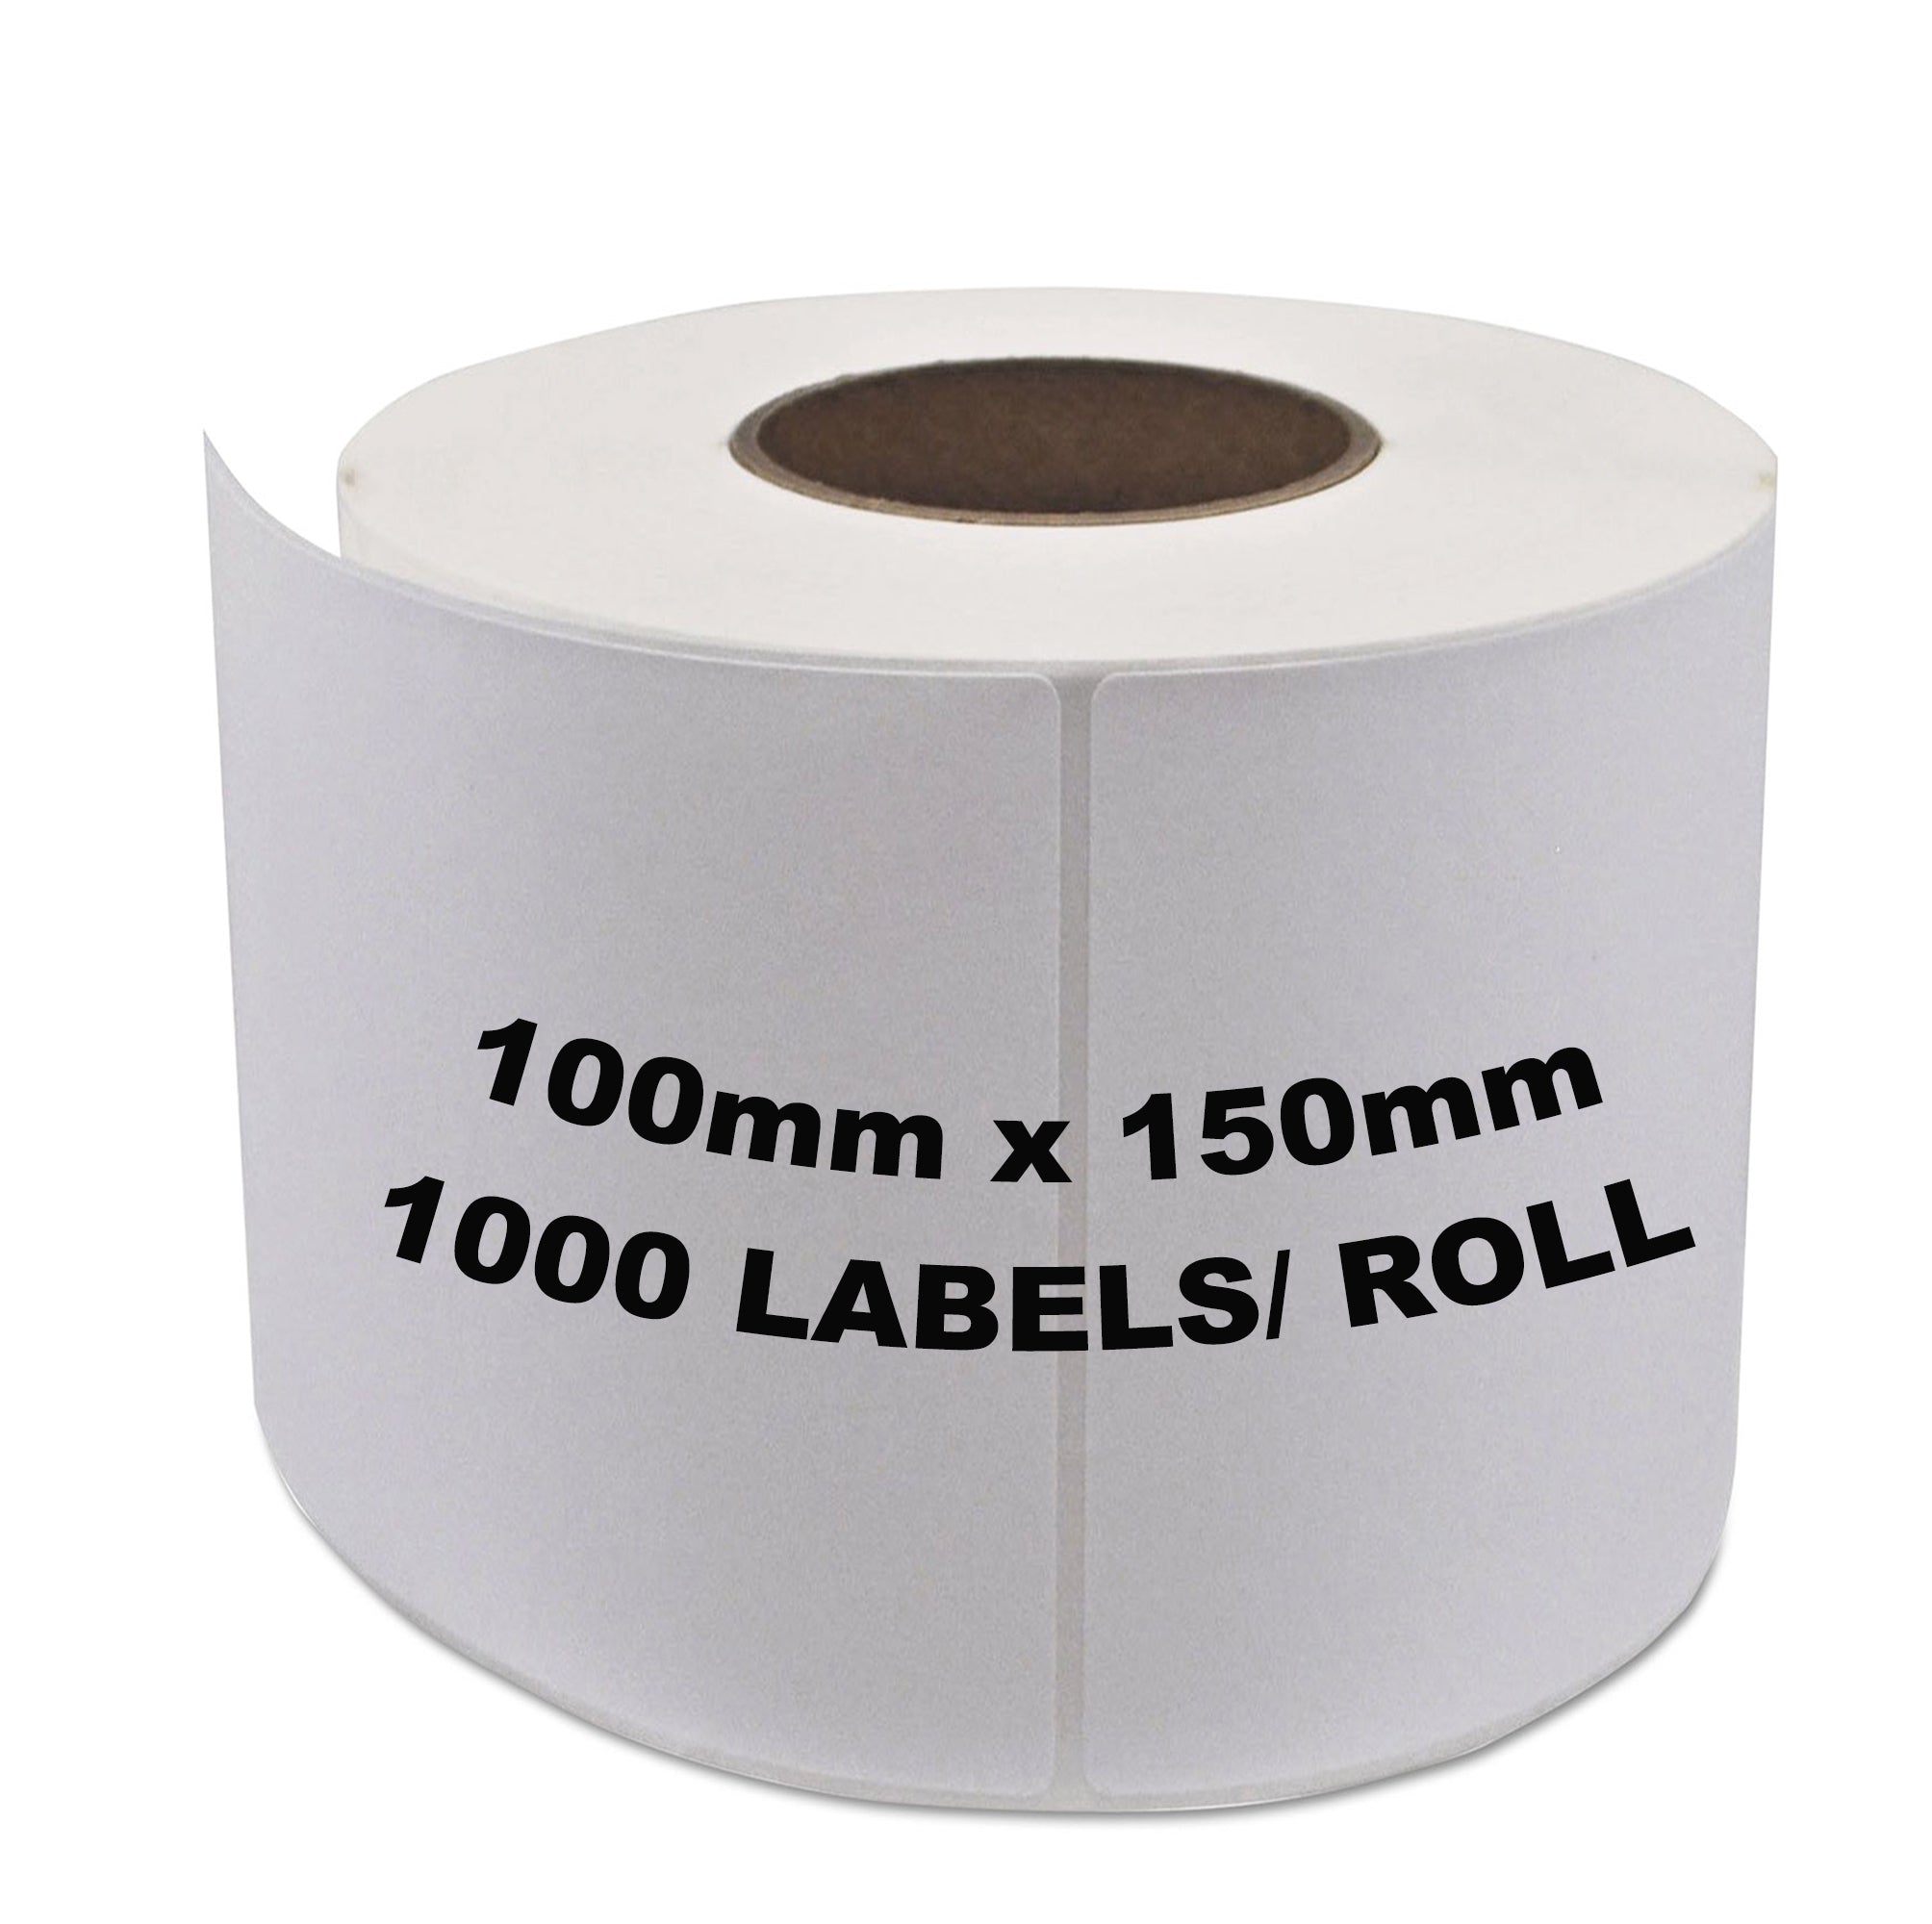 Sendle Shipping Labels 100x150mm 1000 Labels/Roll [For Zebra Direct Thermal Industrial Printers]